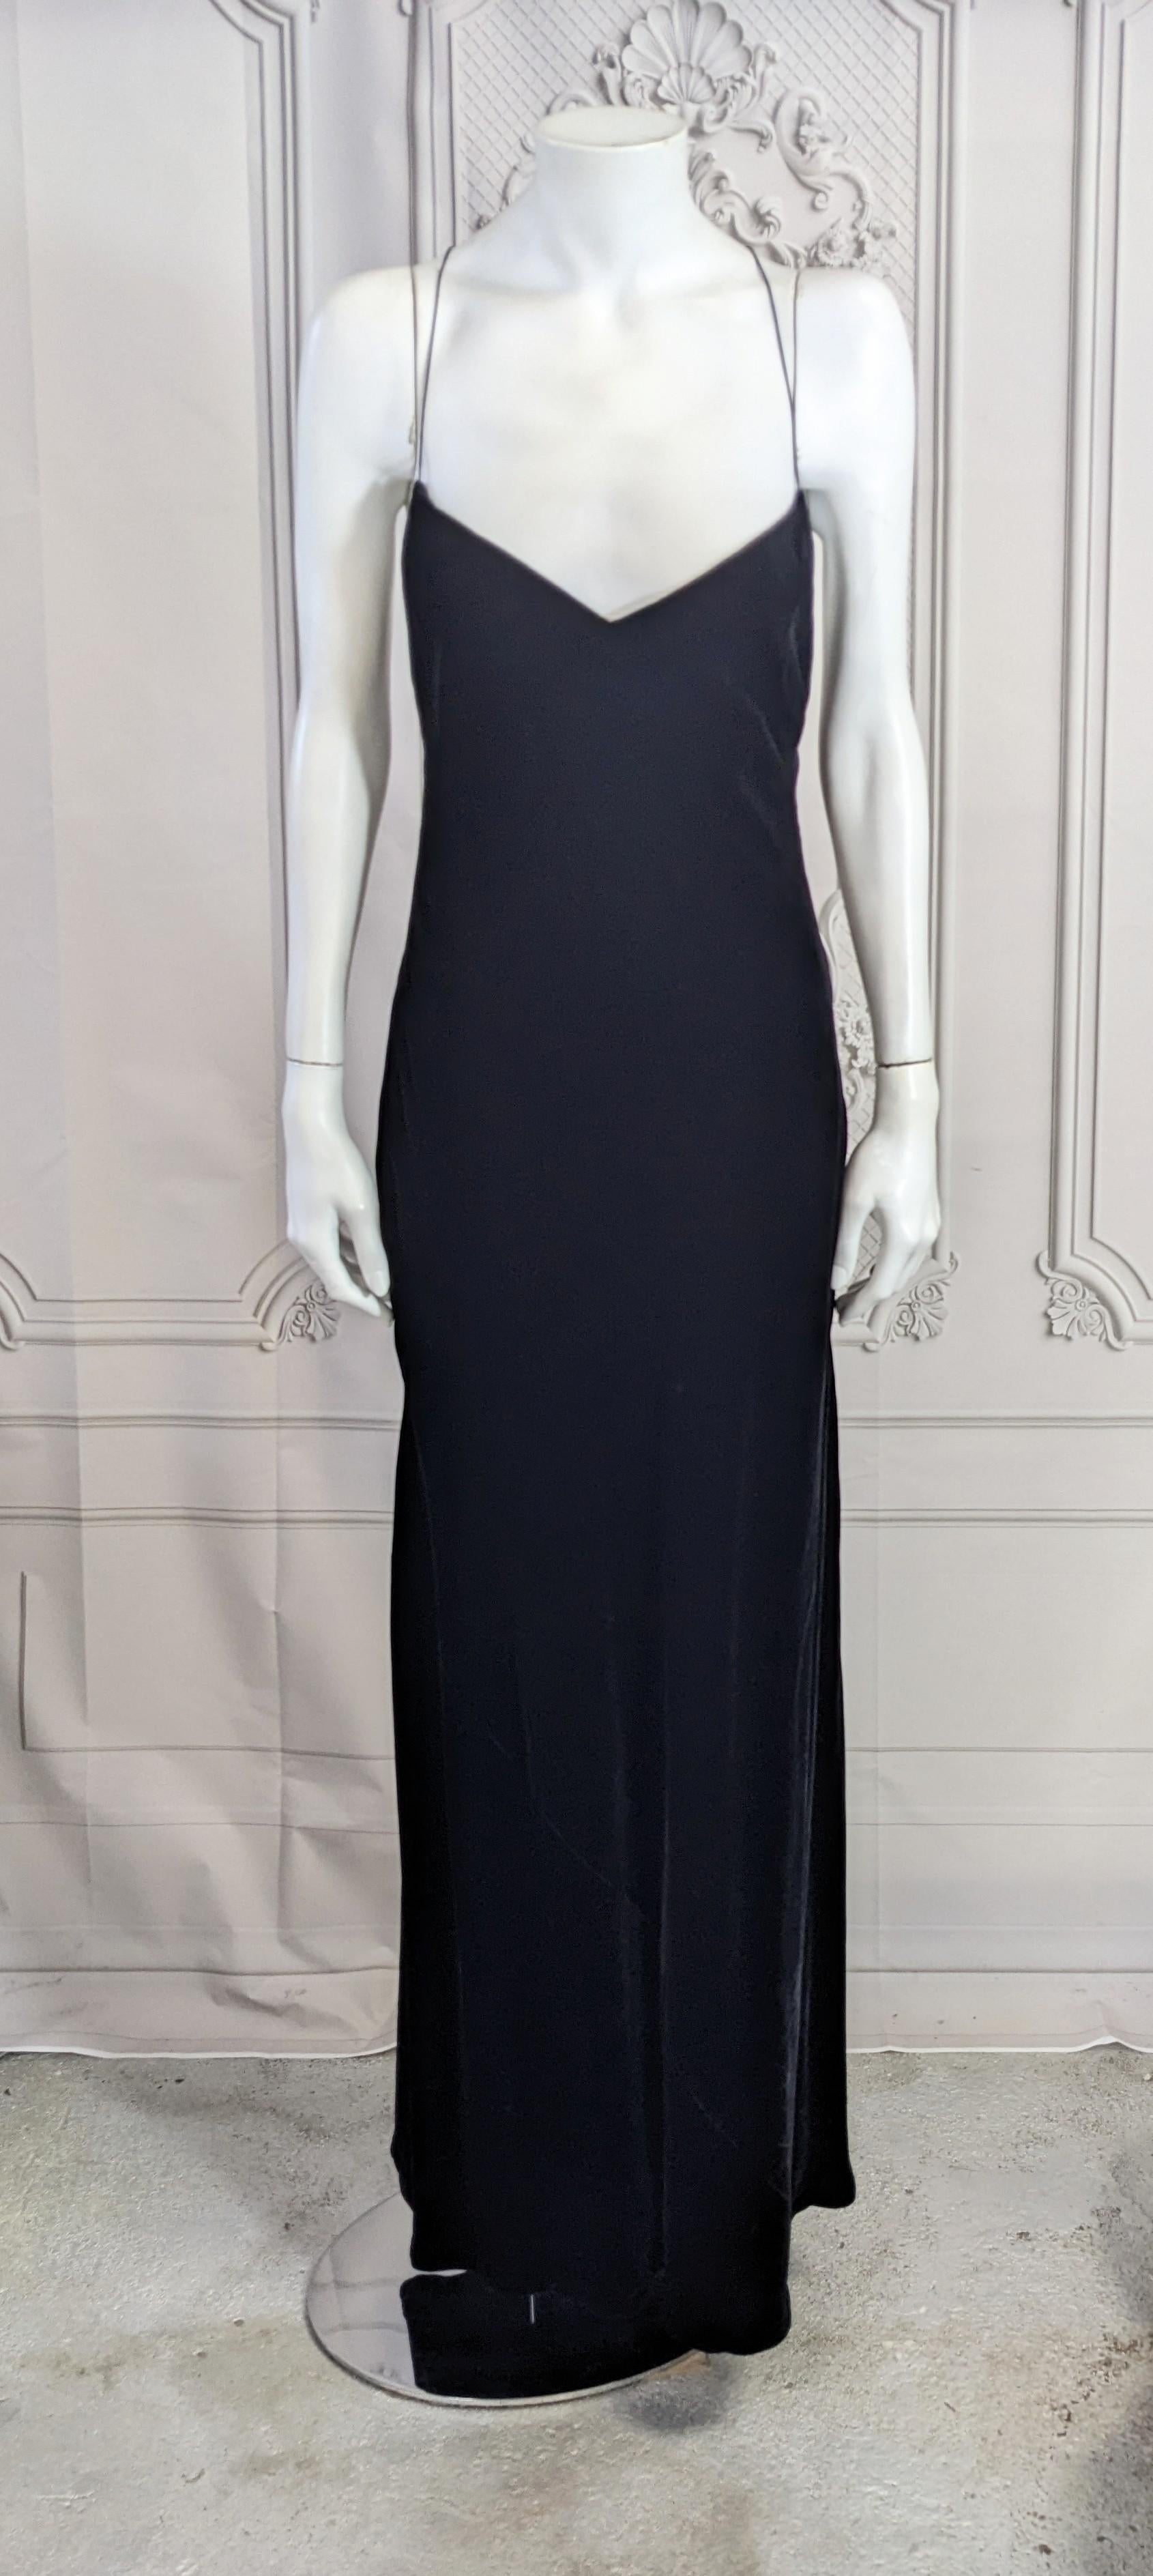 Classically elegant Ralph Lauren Bias Silk Velvet Slip Dress from the late 1990s. Bias cut in the typical 1930's style with silk cord straps. Luxurious inky black silk velvet completely lined in silk satin. Beautifully and simply cut for a sexy,